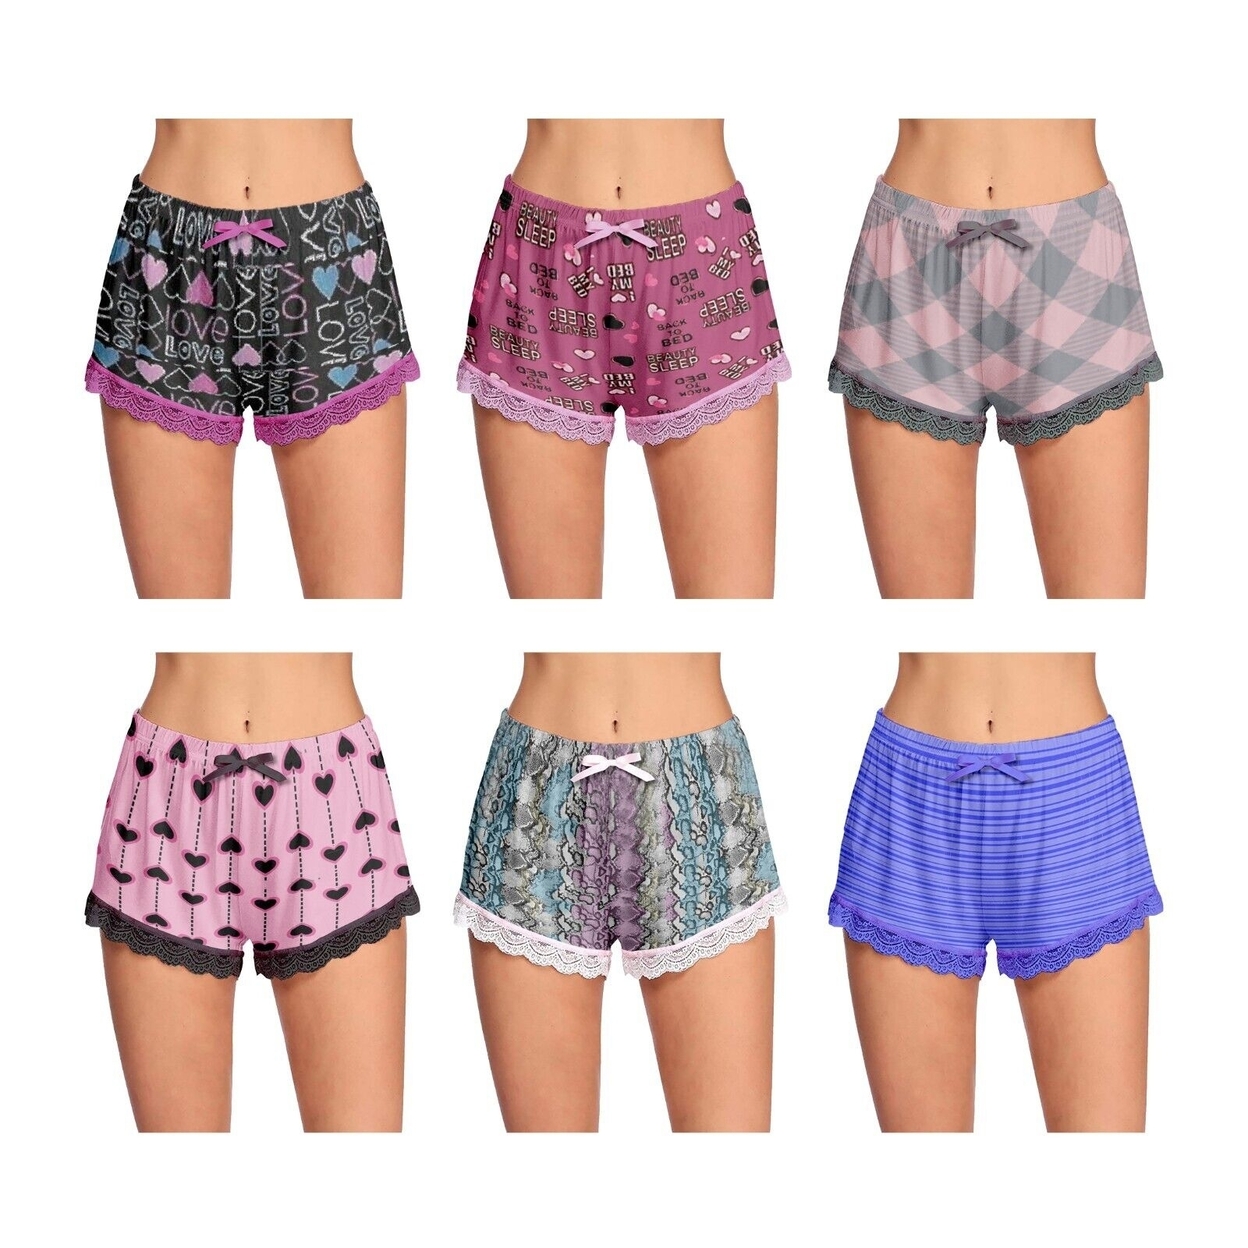 4-Pack: Women's Ultra-Soft Cozy Fun Printed Lace Trim Pajama Lounge Shorts - Large, Shapes